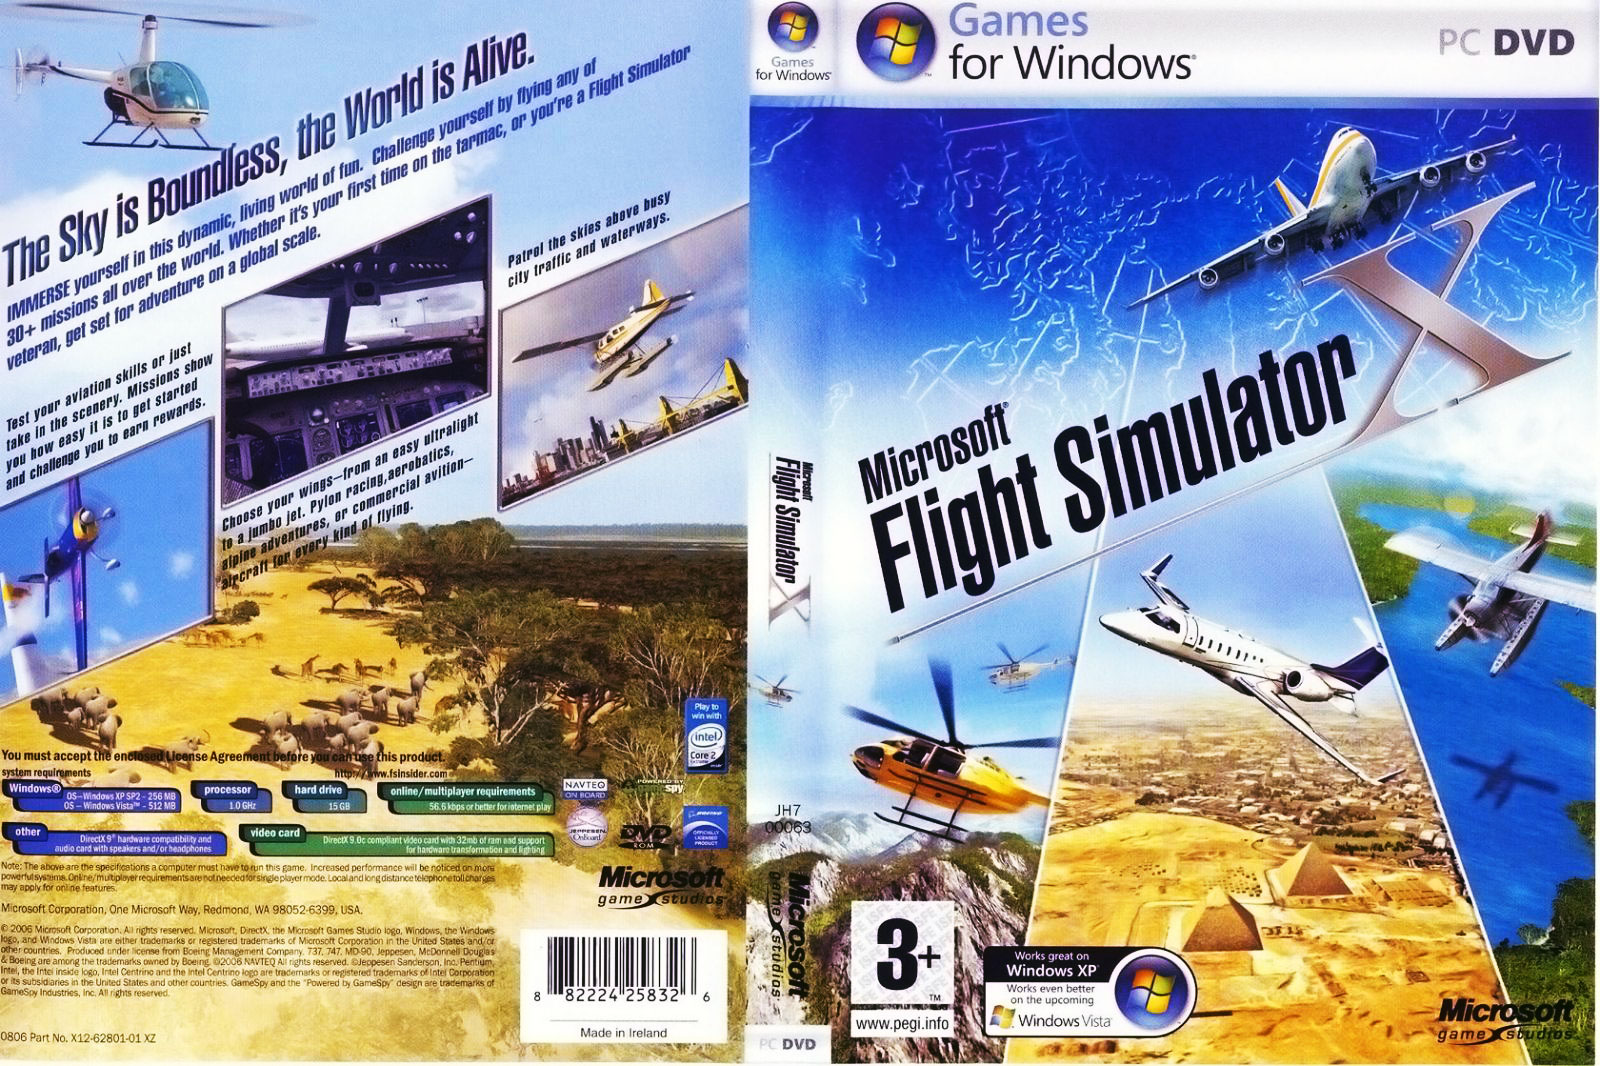 download the new version for ios Ultimate Flight Simulator Pro